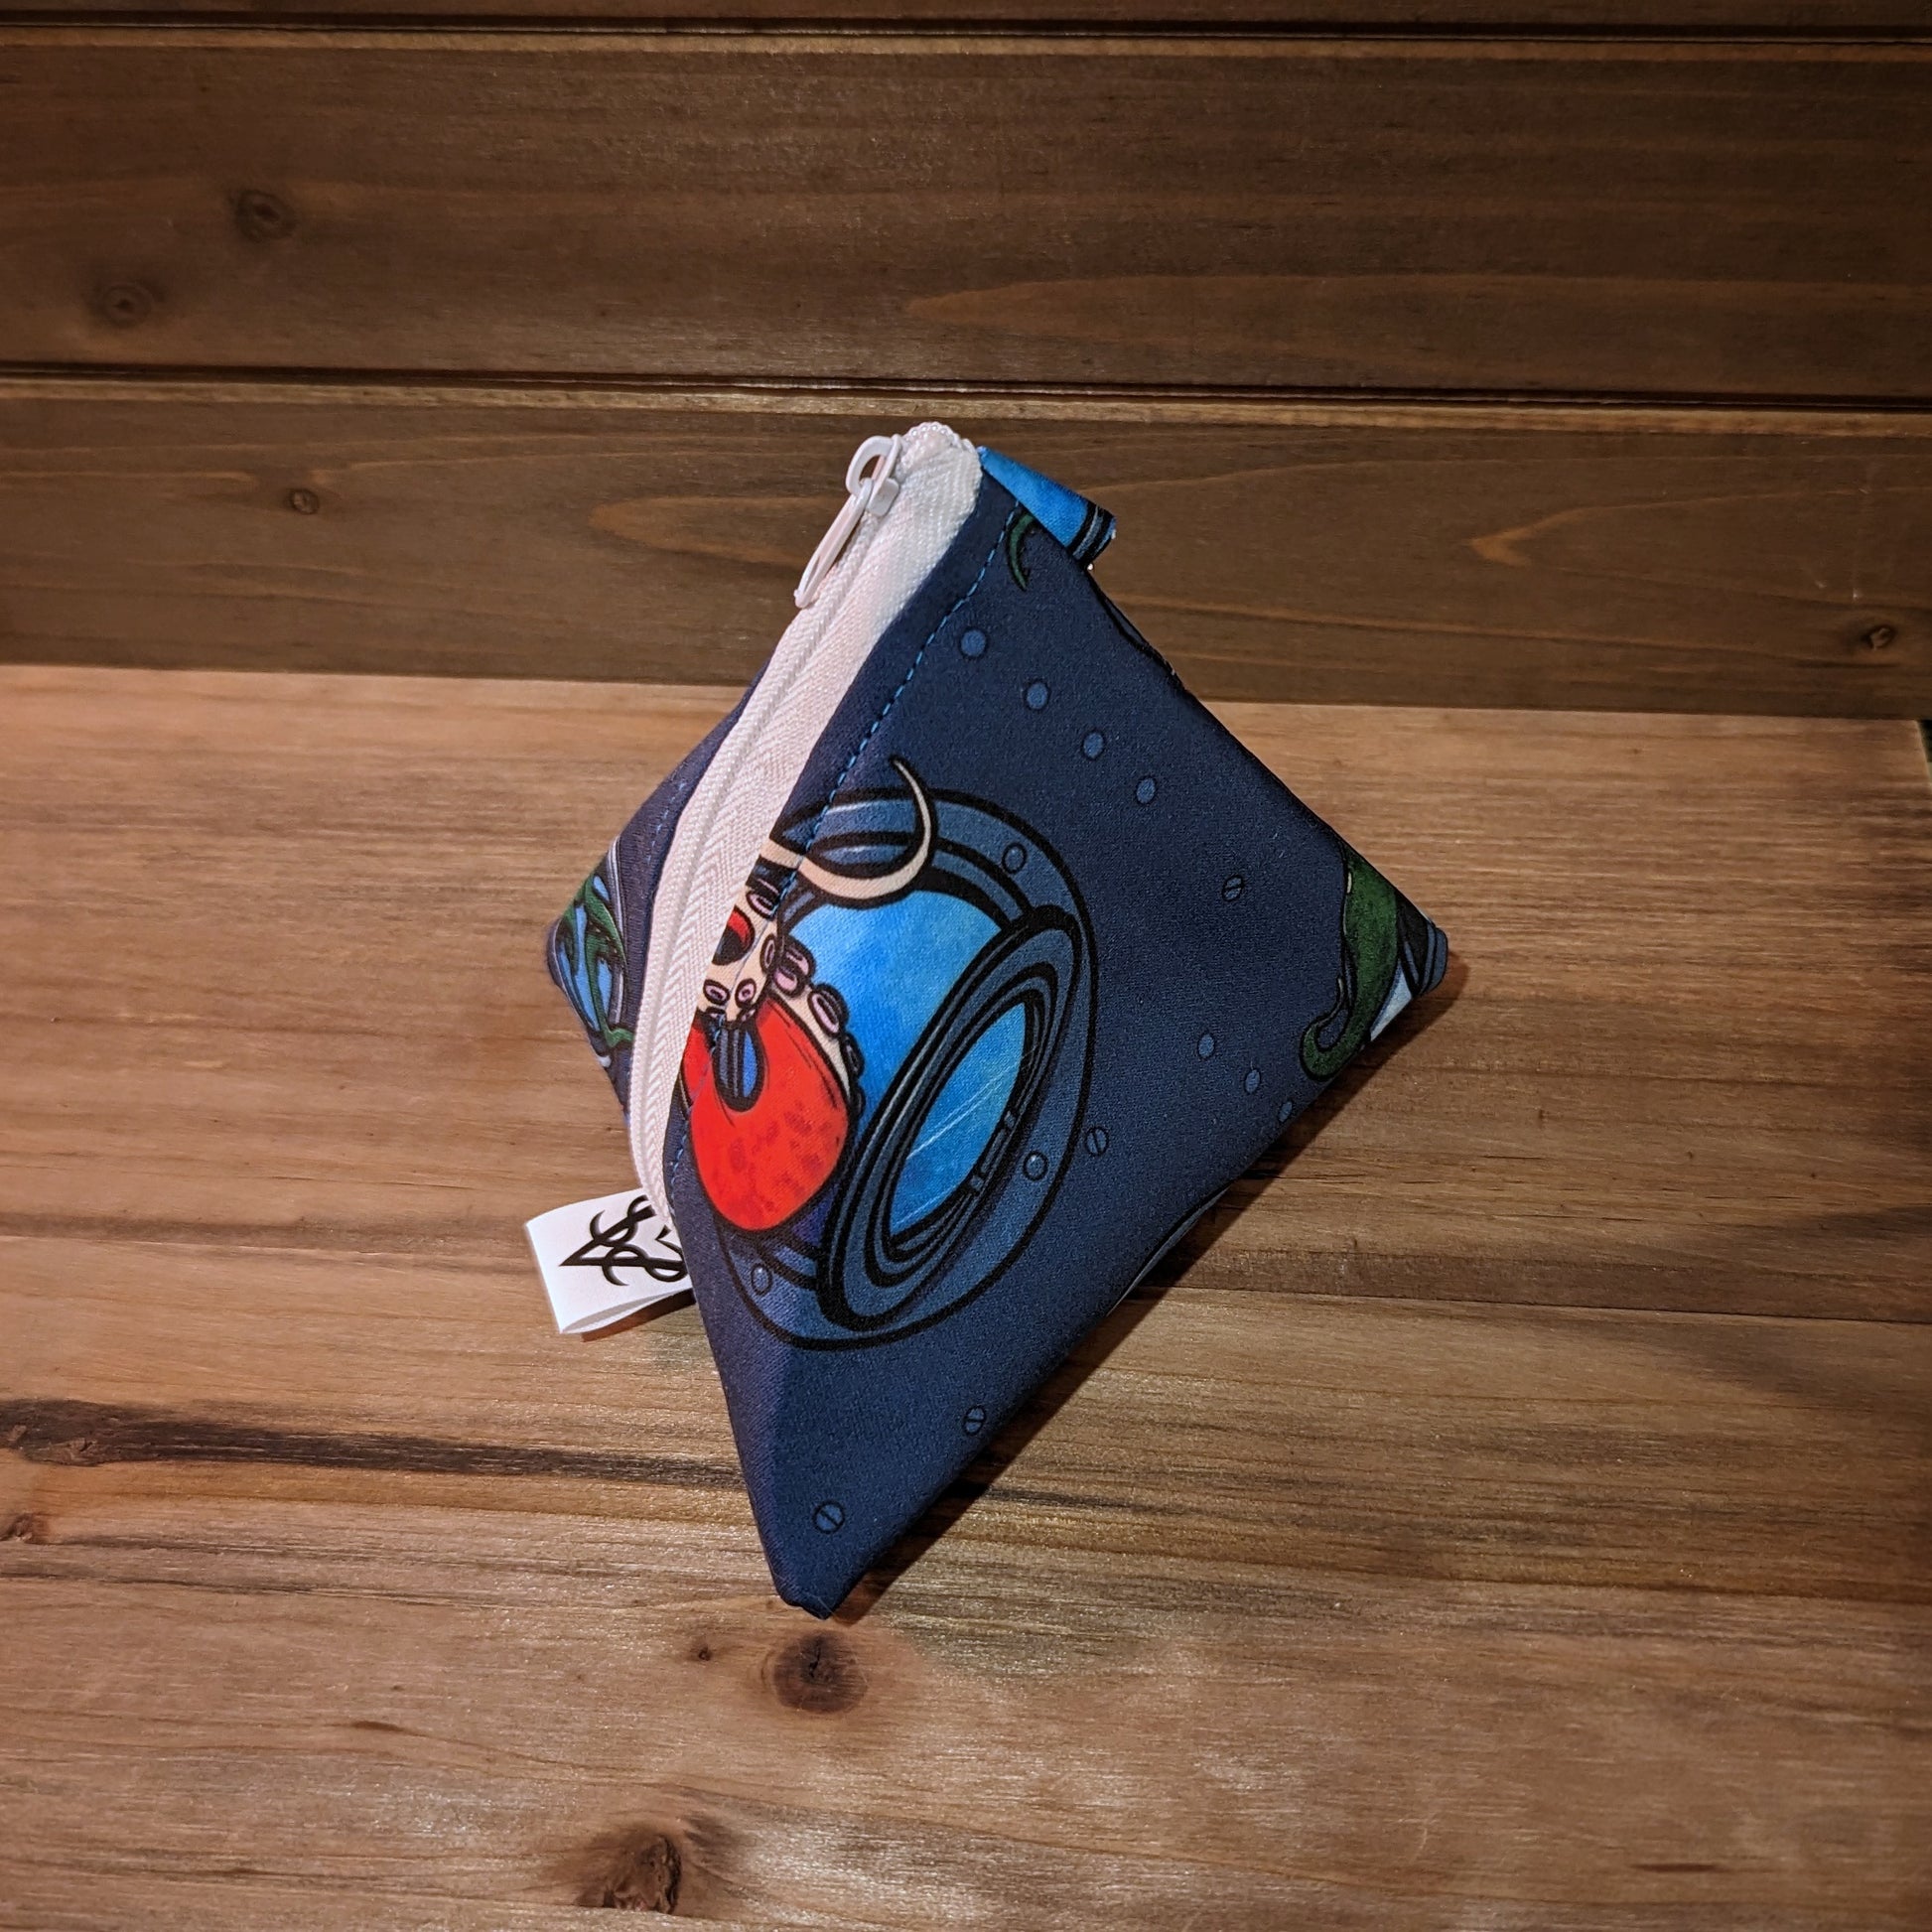 A 5 inch D4 bag has an print that looks like the inside of a submarine with tentacles breaching portholes near a nervous looking fish, a white zipper, and a keychain clip.